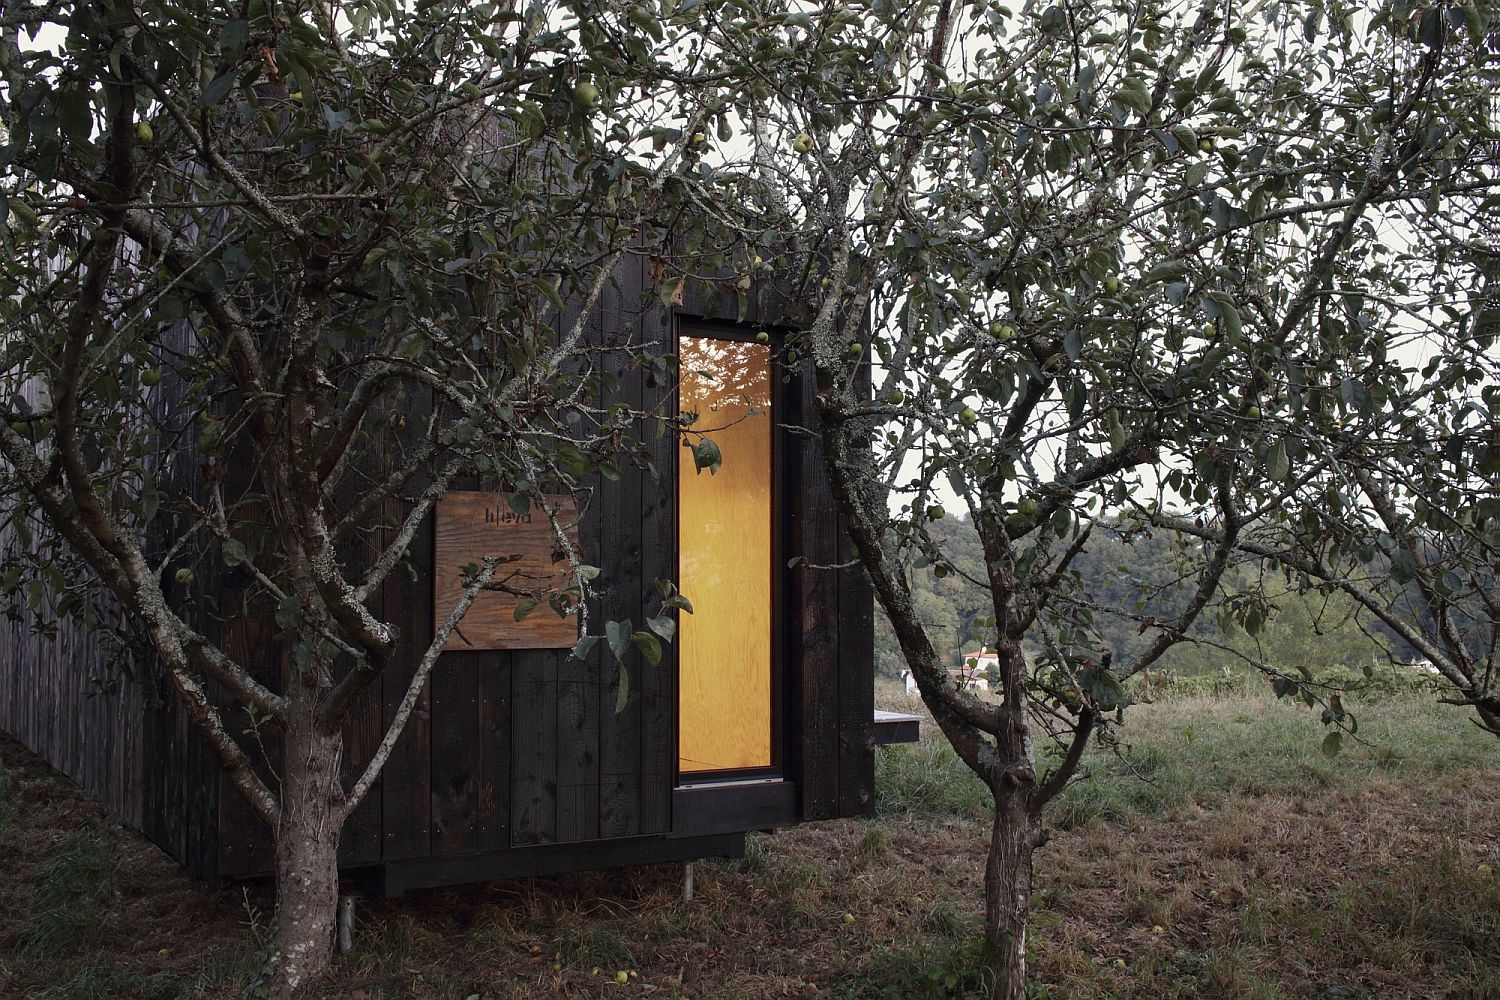 Smart wooden cabin can be moved around with ease